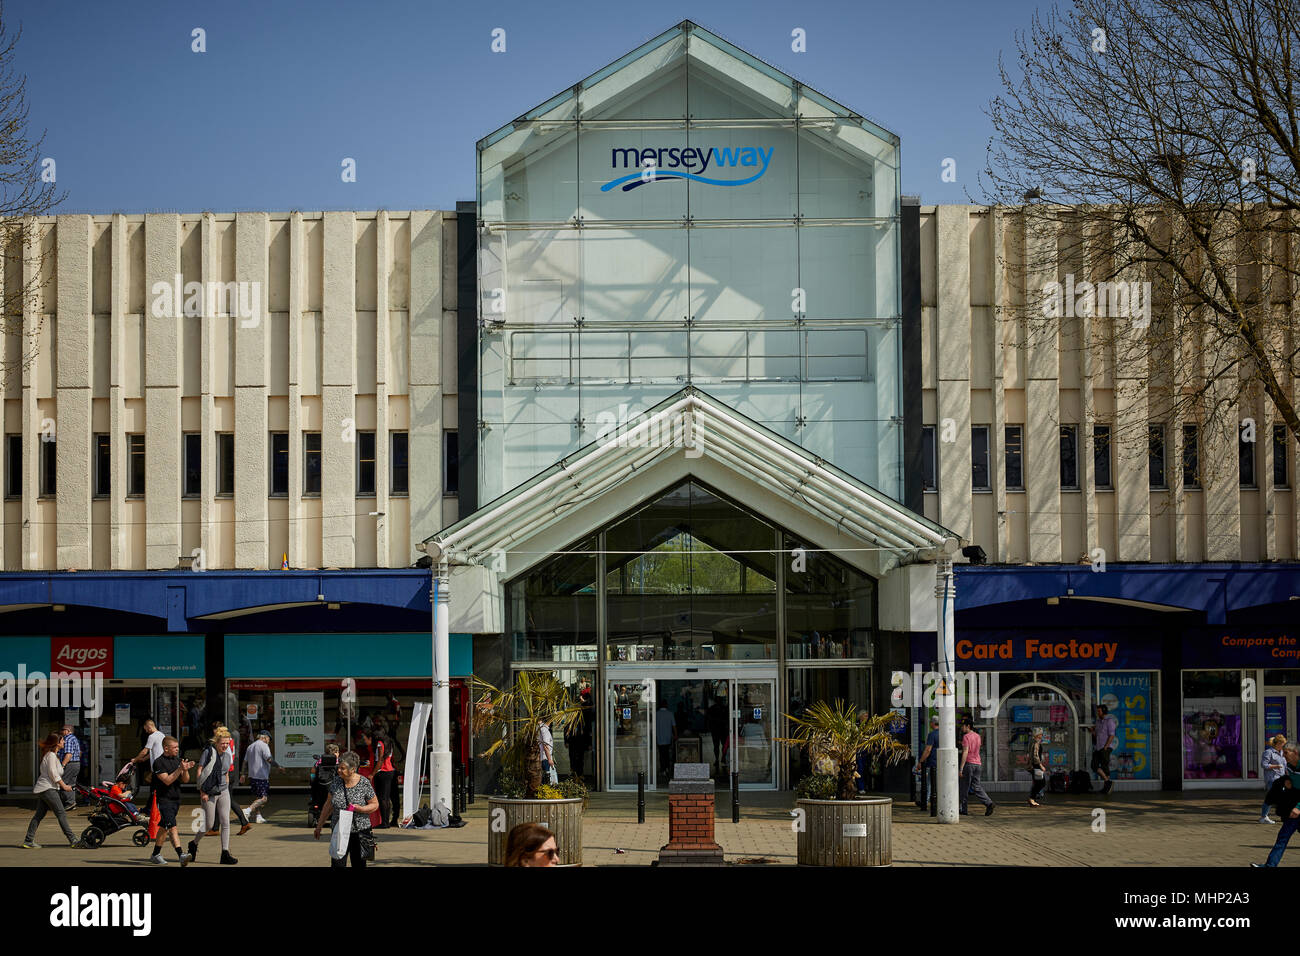 Stockport town centre, Merseyway main front entrance Stock Photo